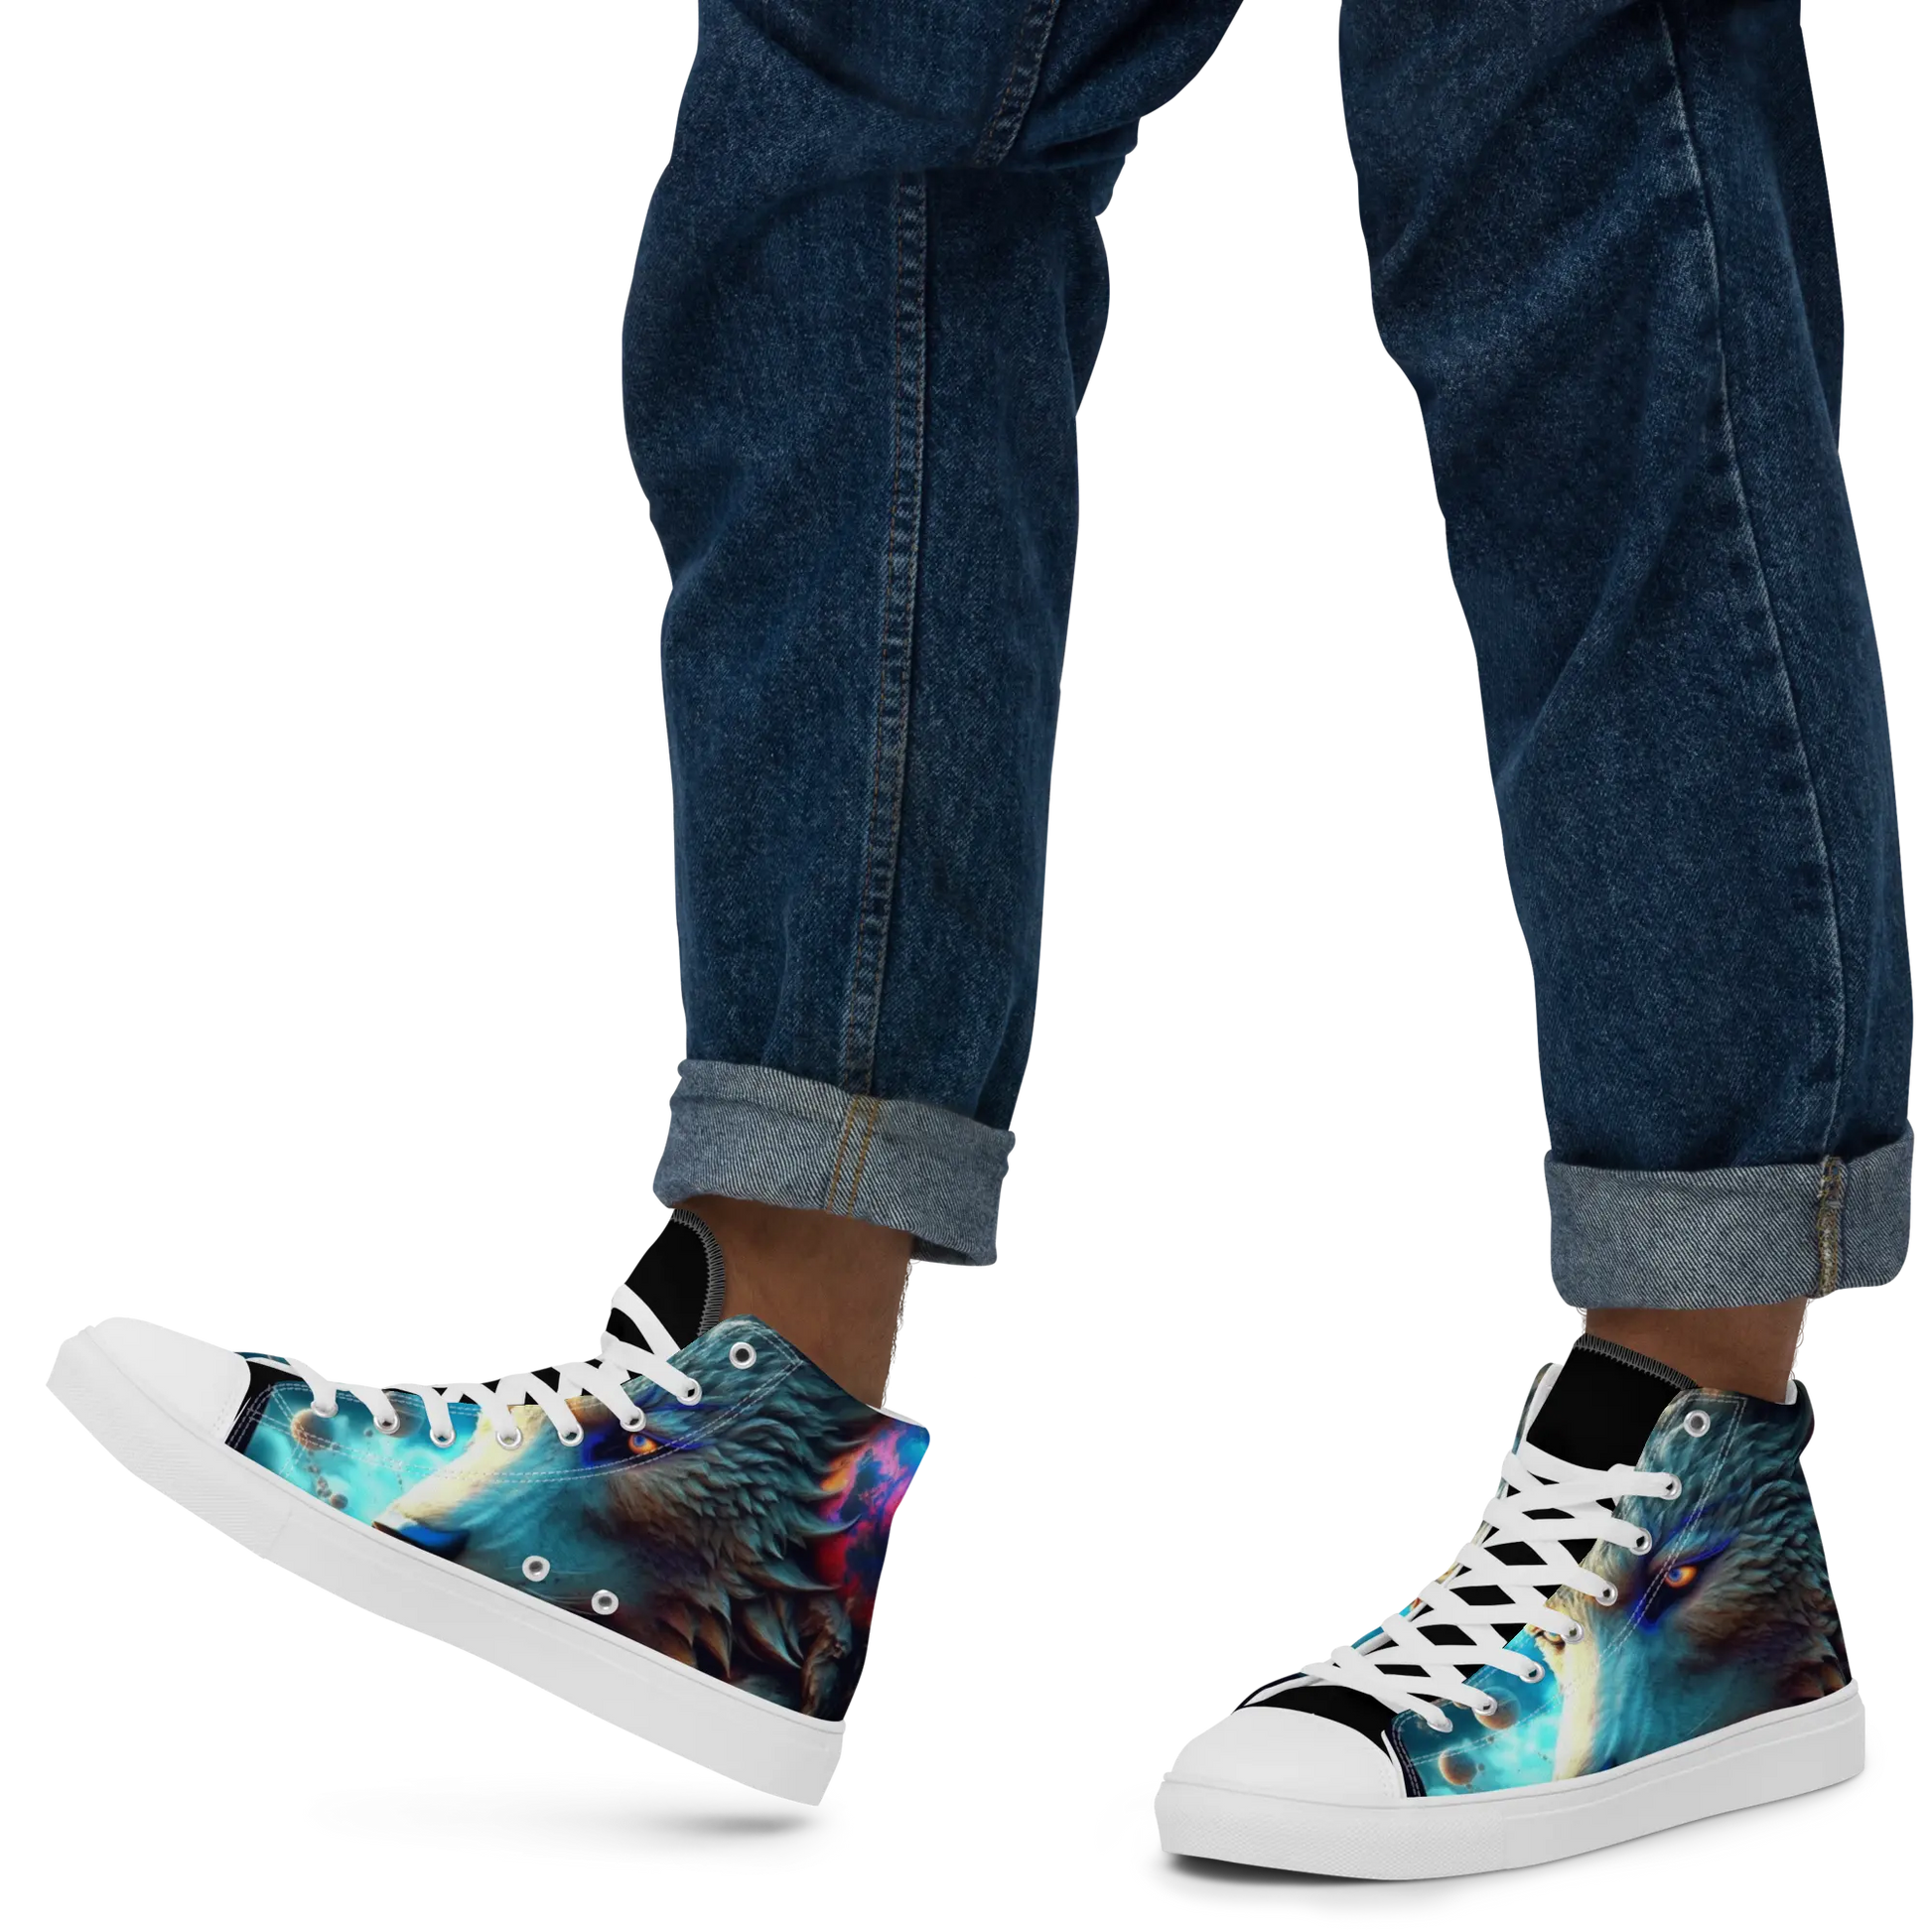 Arctic Wolf High Top Sneakers: AI-Engineered, Wilderness-Inspired Style, Durable, Comfortable, Unisex, Ideal for Everyday Adventure Kinetic Footwear